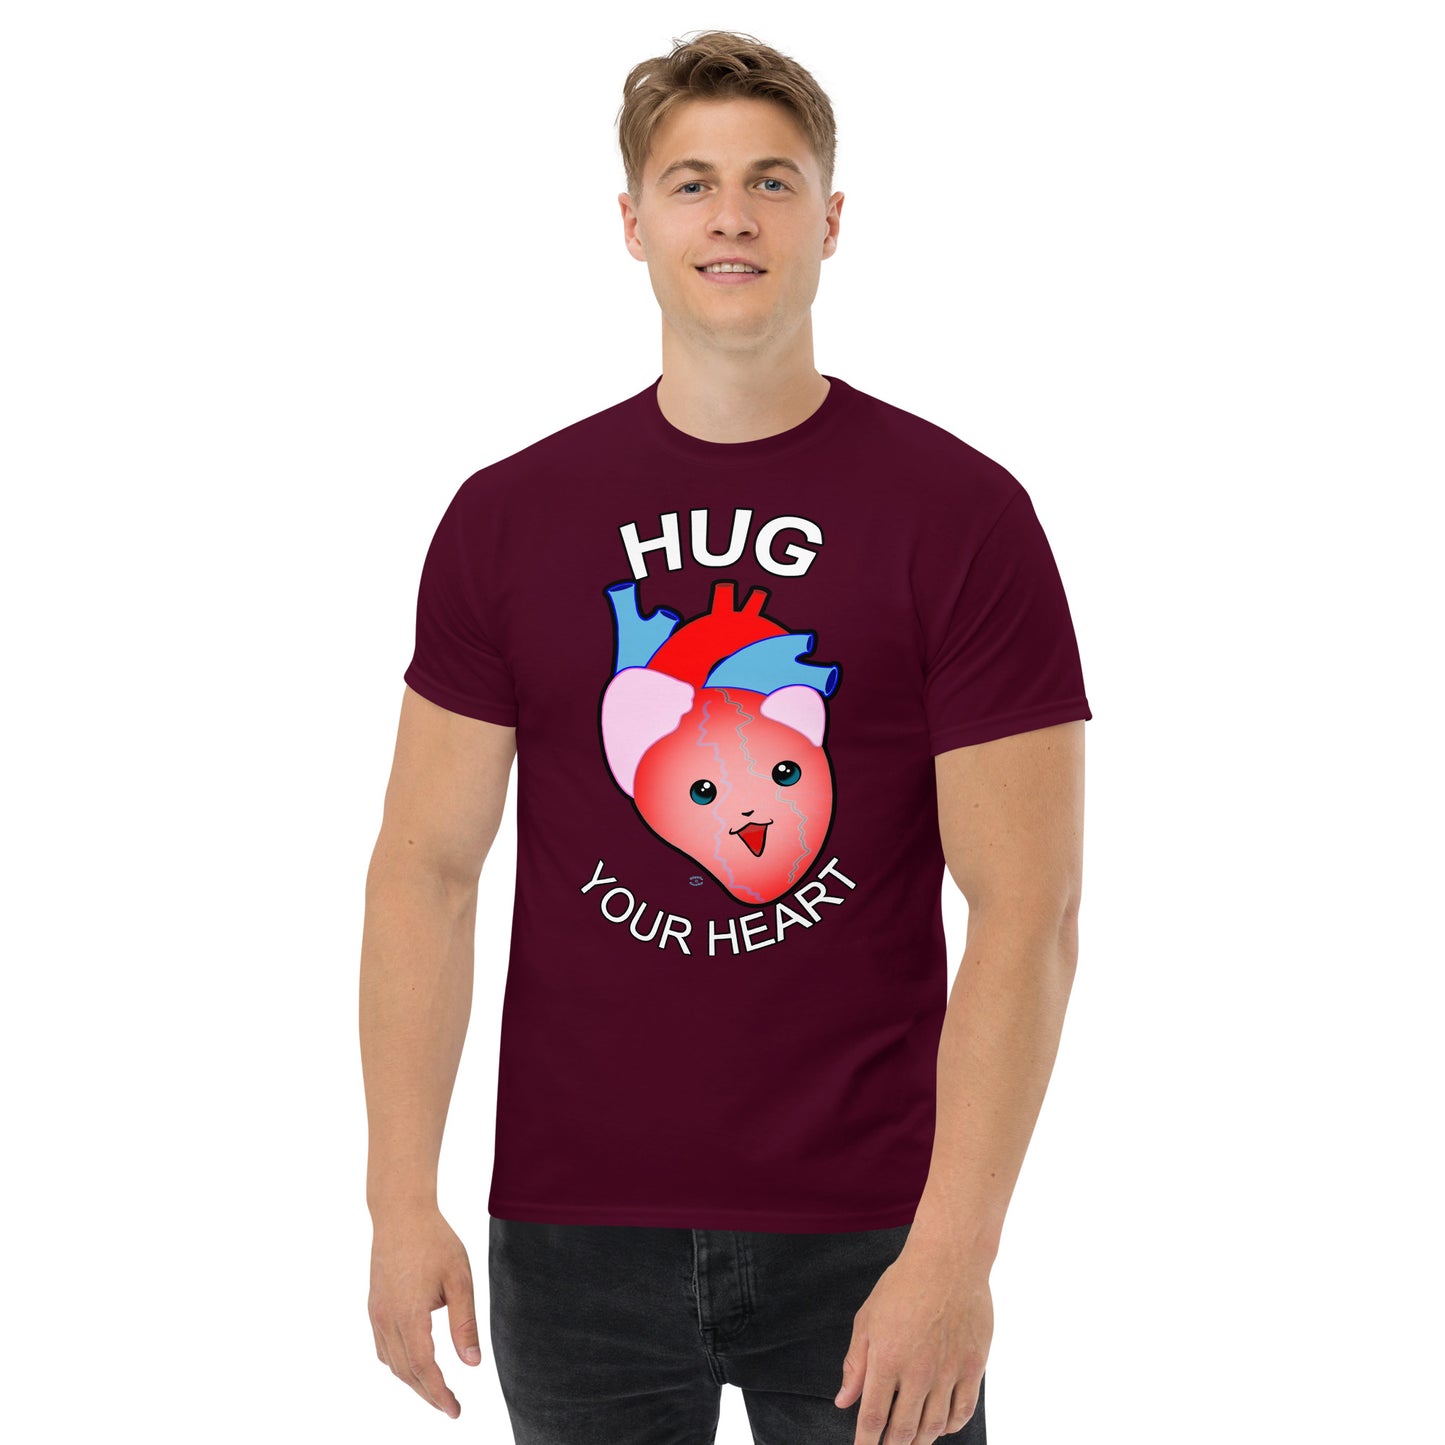 A Picture of a man wearing a short sleeved tshirt with a picture on the front of a smiling heart with the text "HUG Your Heart" - color maroon